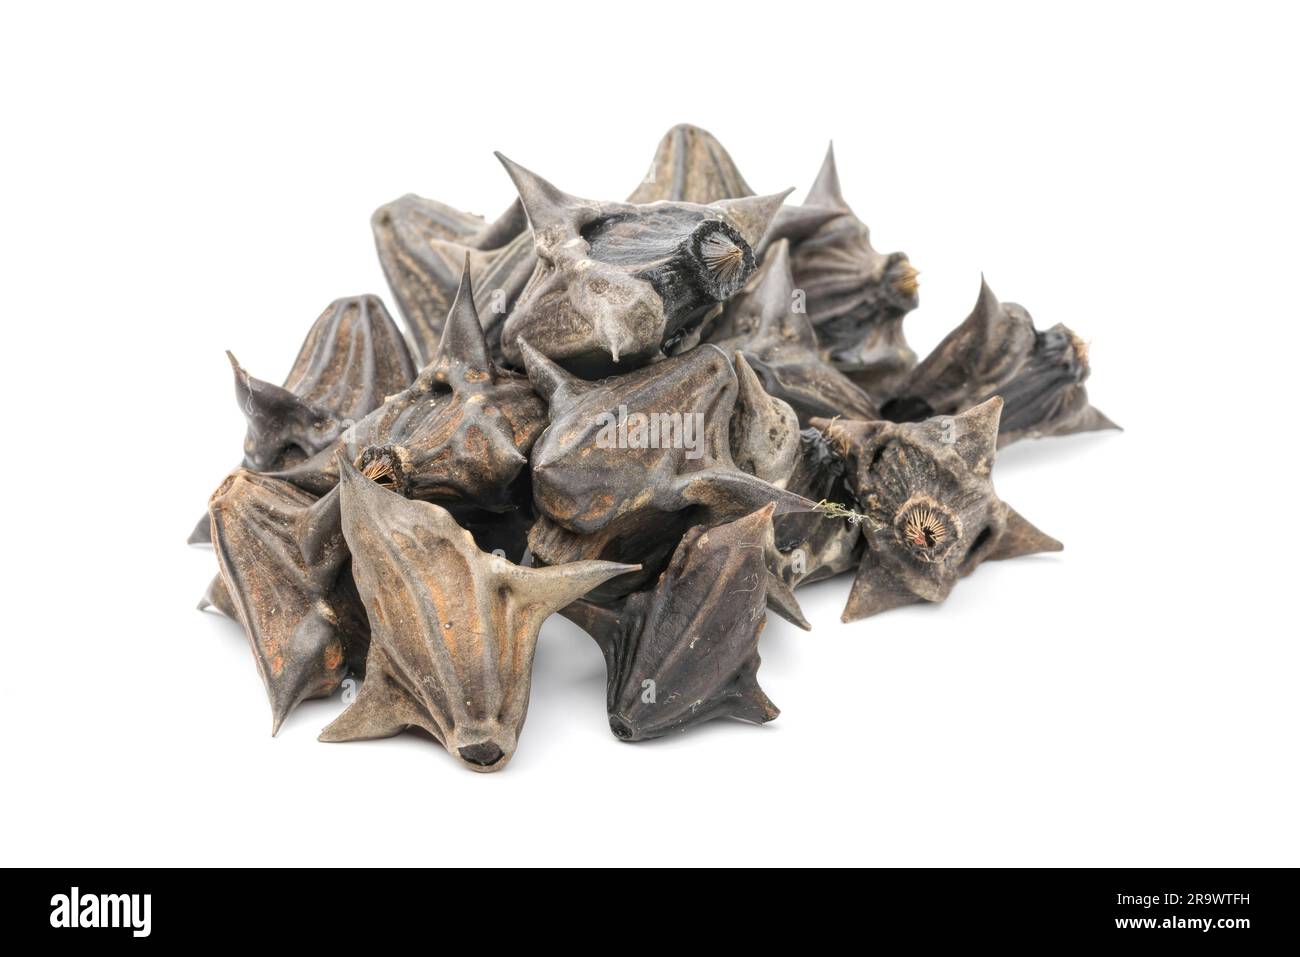 A heap of water chestnuts (trapa natans), isolated on a white background Stock Photo